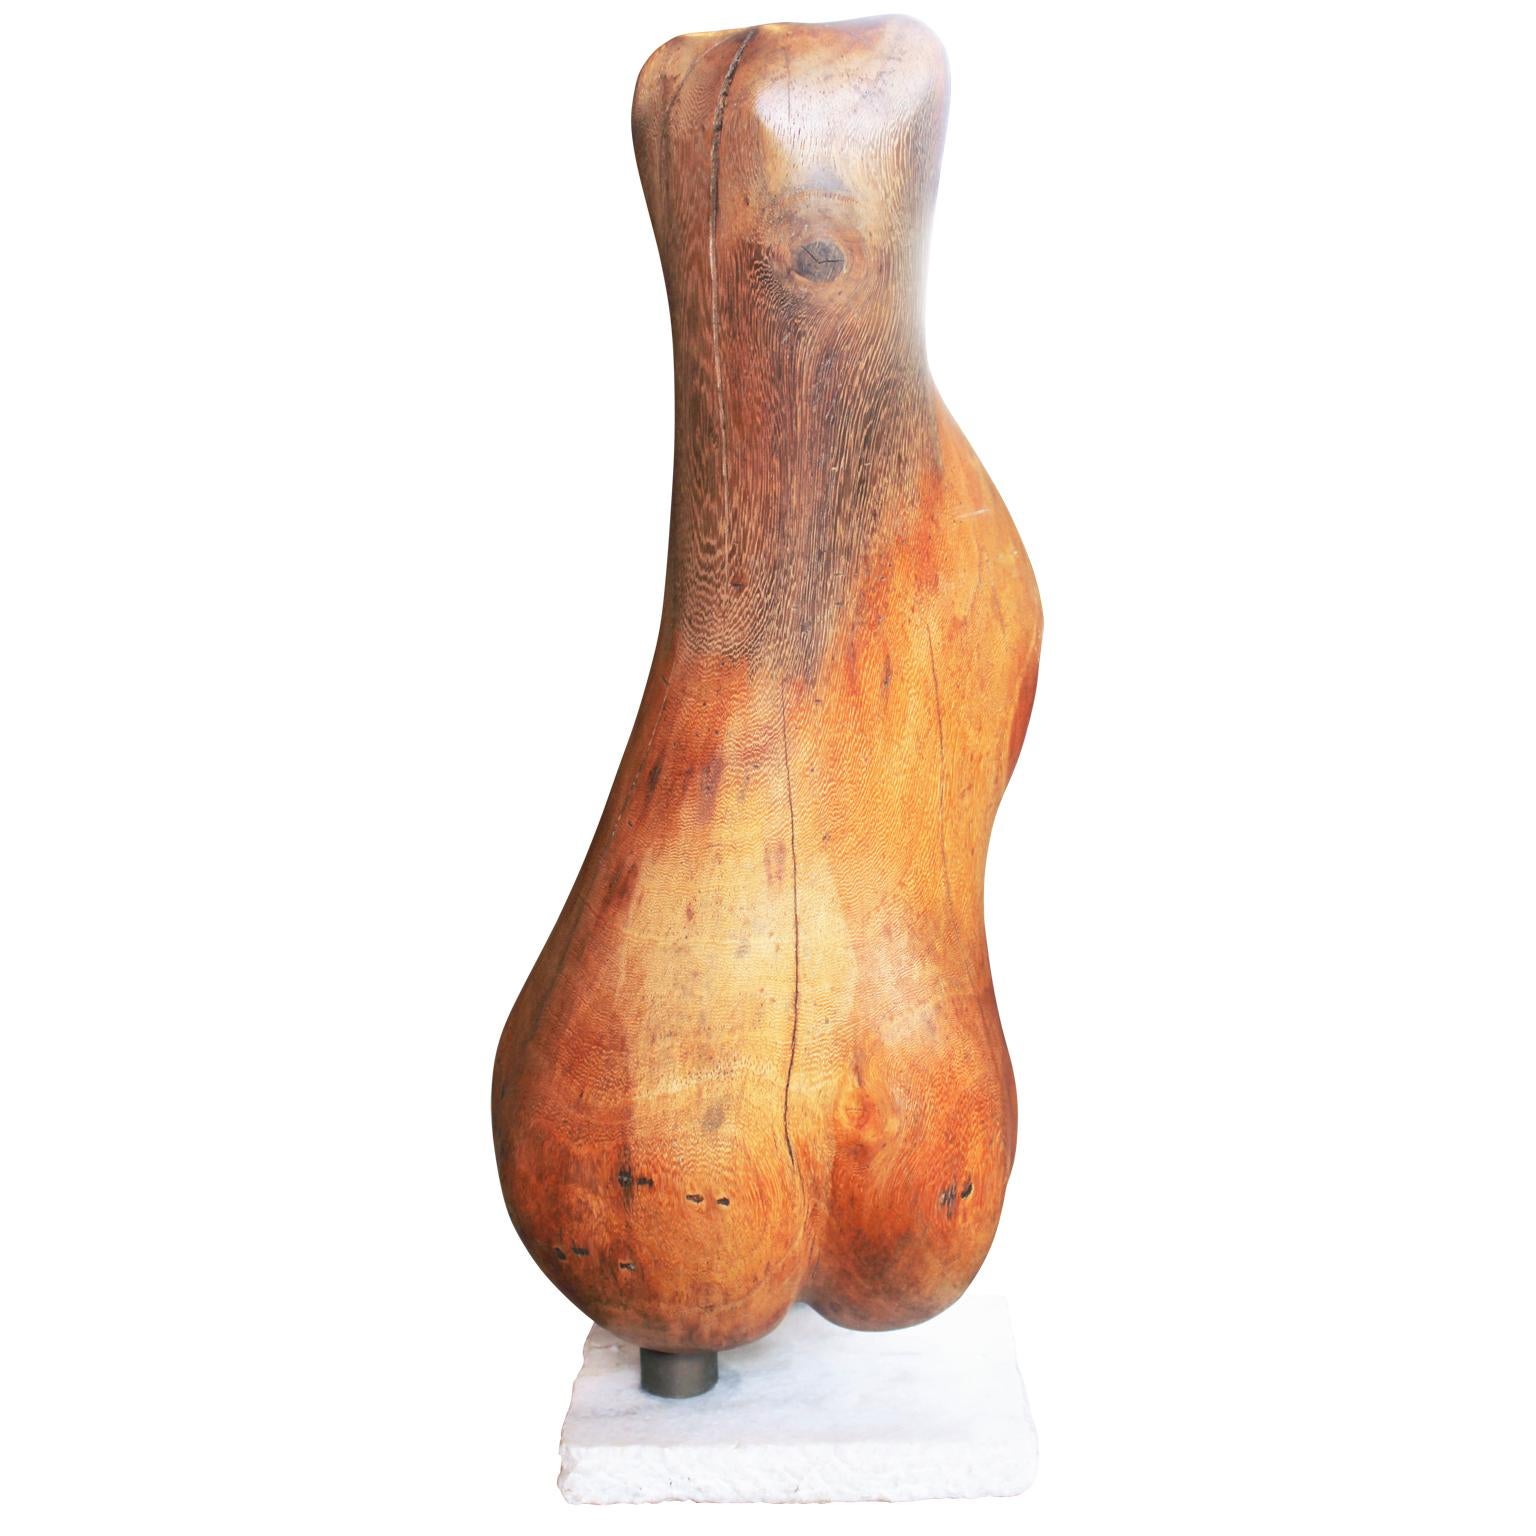 Organic shaped biomorphic wooden sculpture made from a block of fruit wood. The sculpture sits on a marble base with a felt bottom. It is similar to the style of Andrianna Shamaris who makes sculptures from jackfruit trees.
Dimensions are with base.